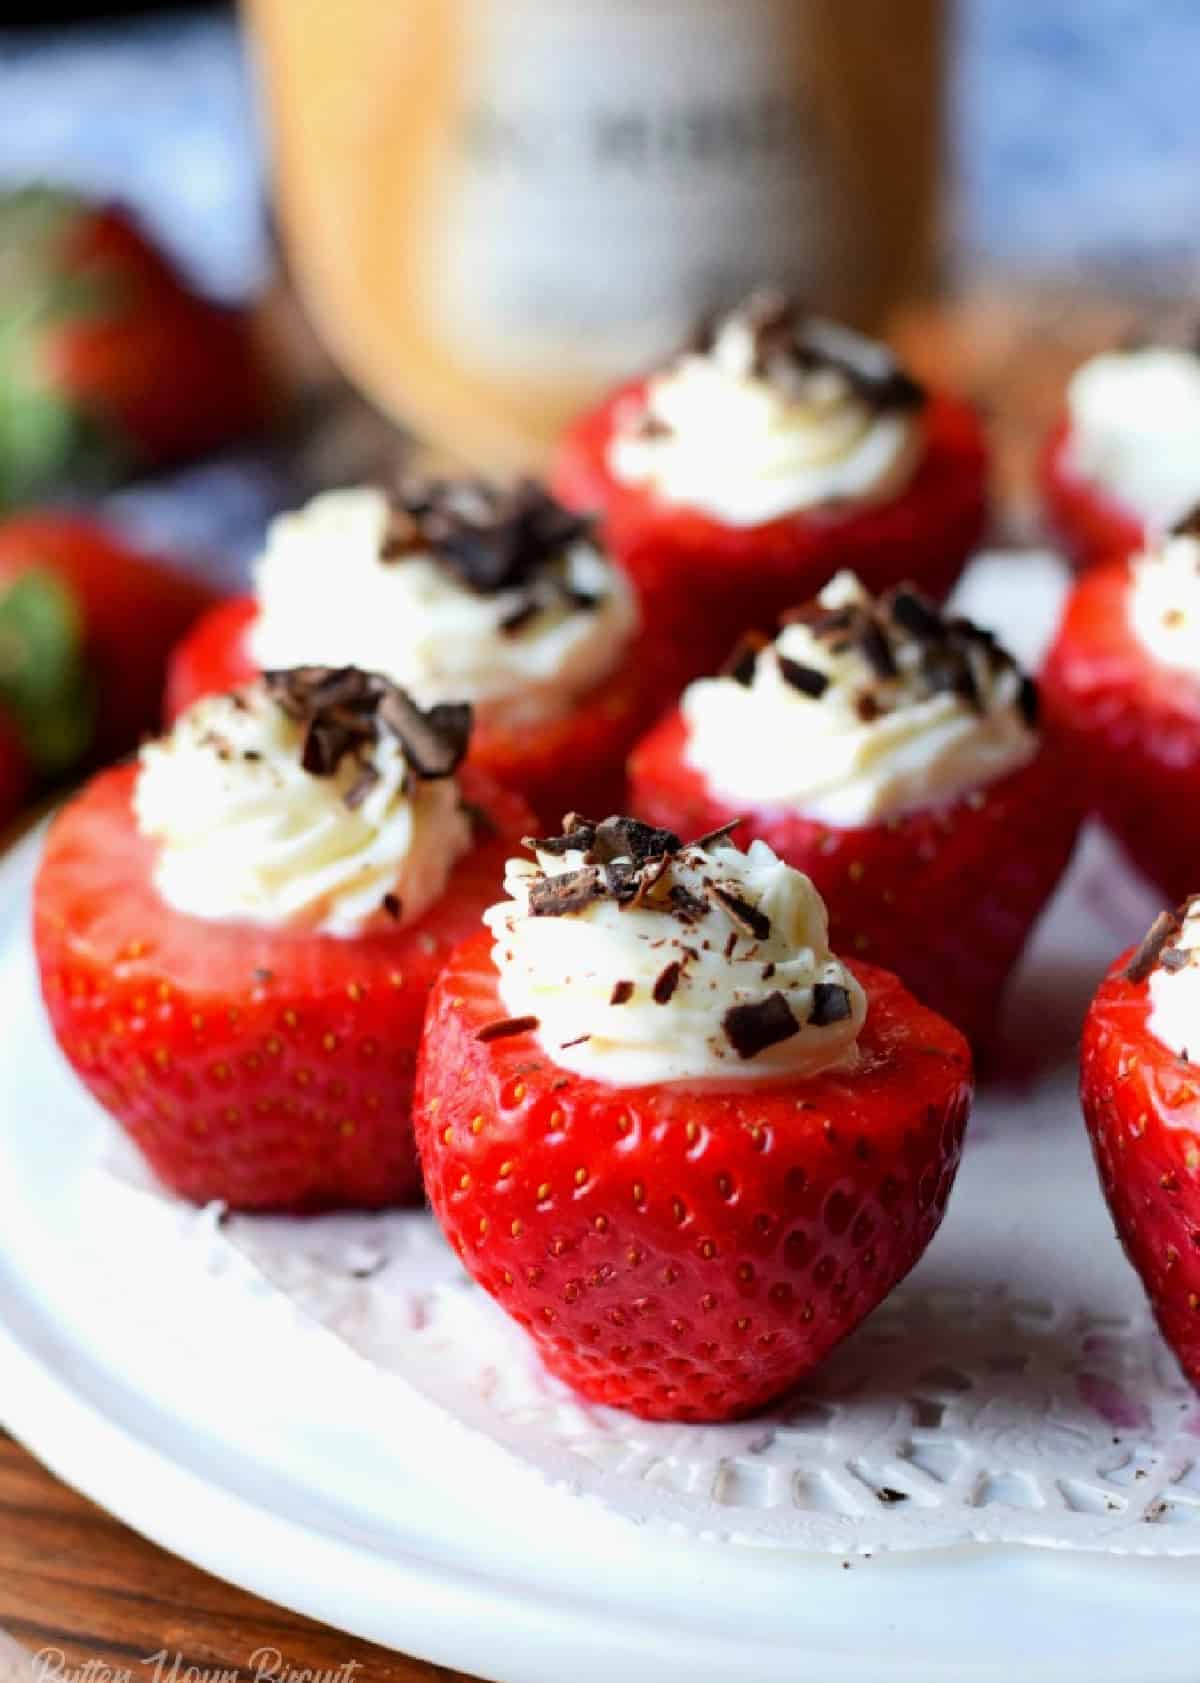 Several cheesecake stuffed strawberries on a white platter.